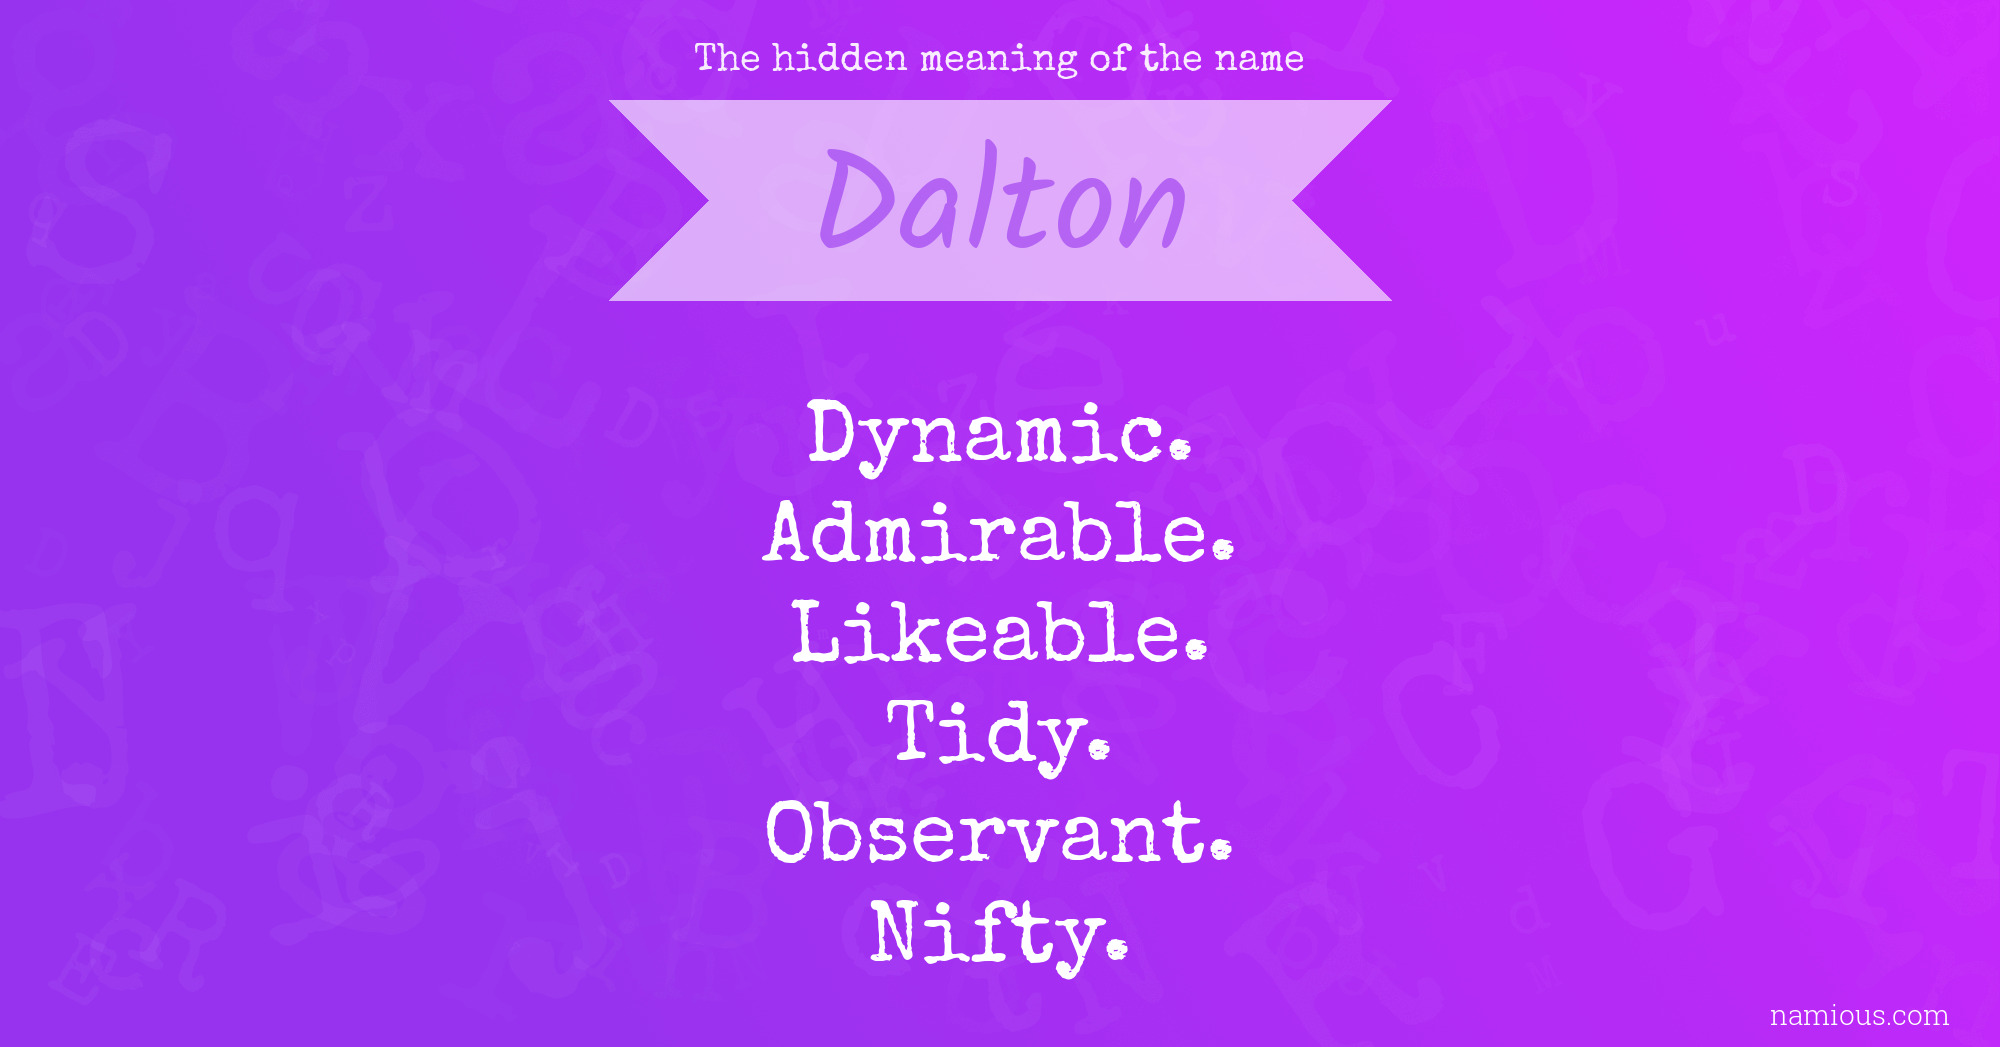 The hidden meaning of the name Dalton